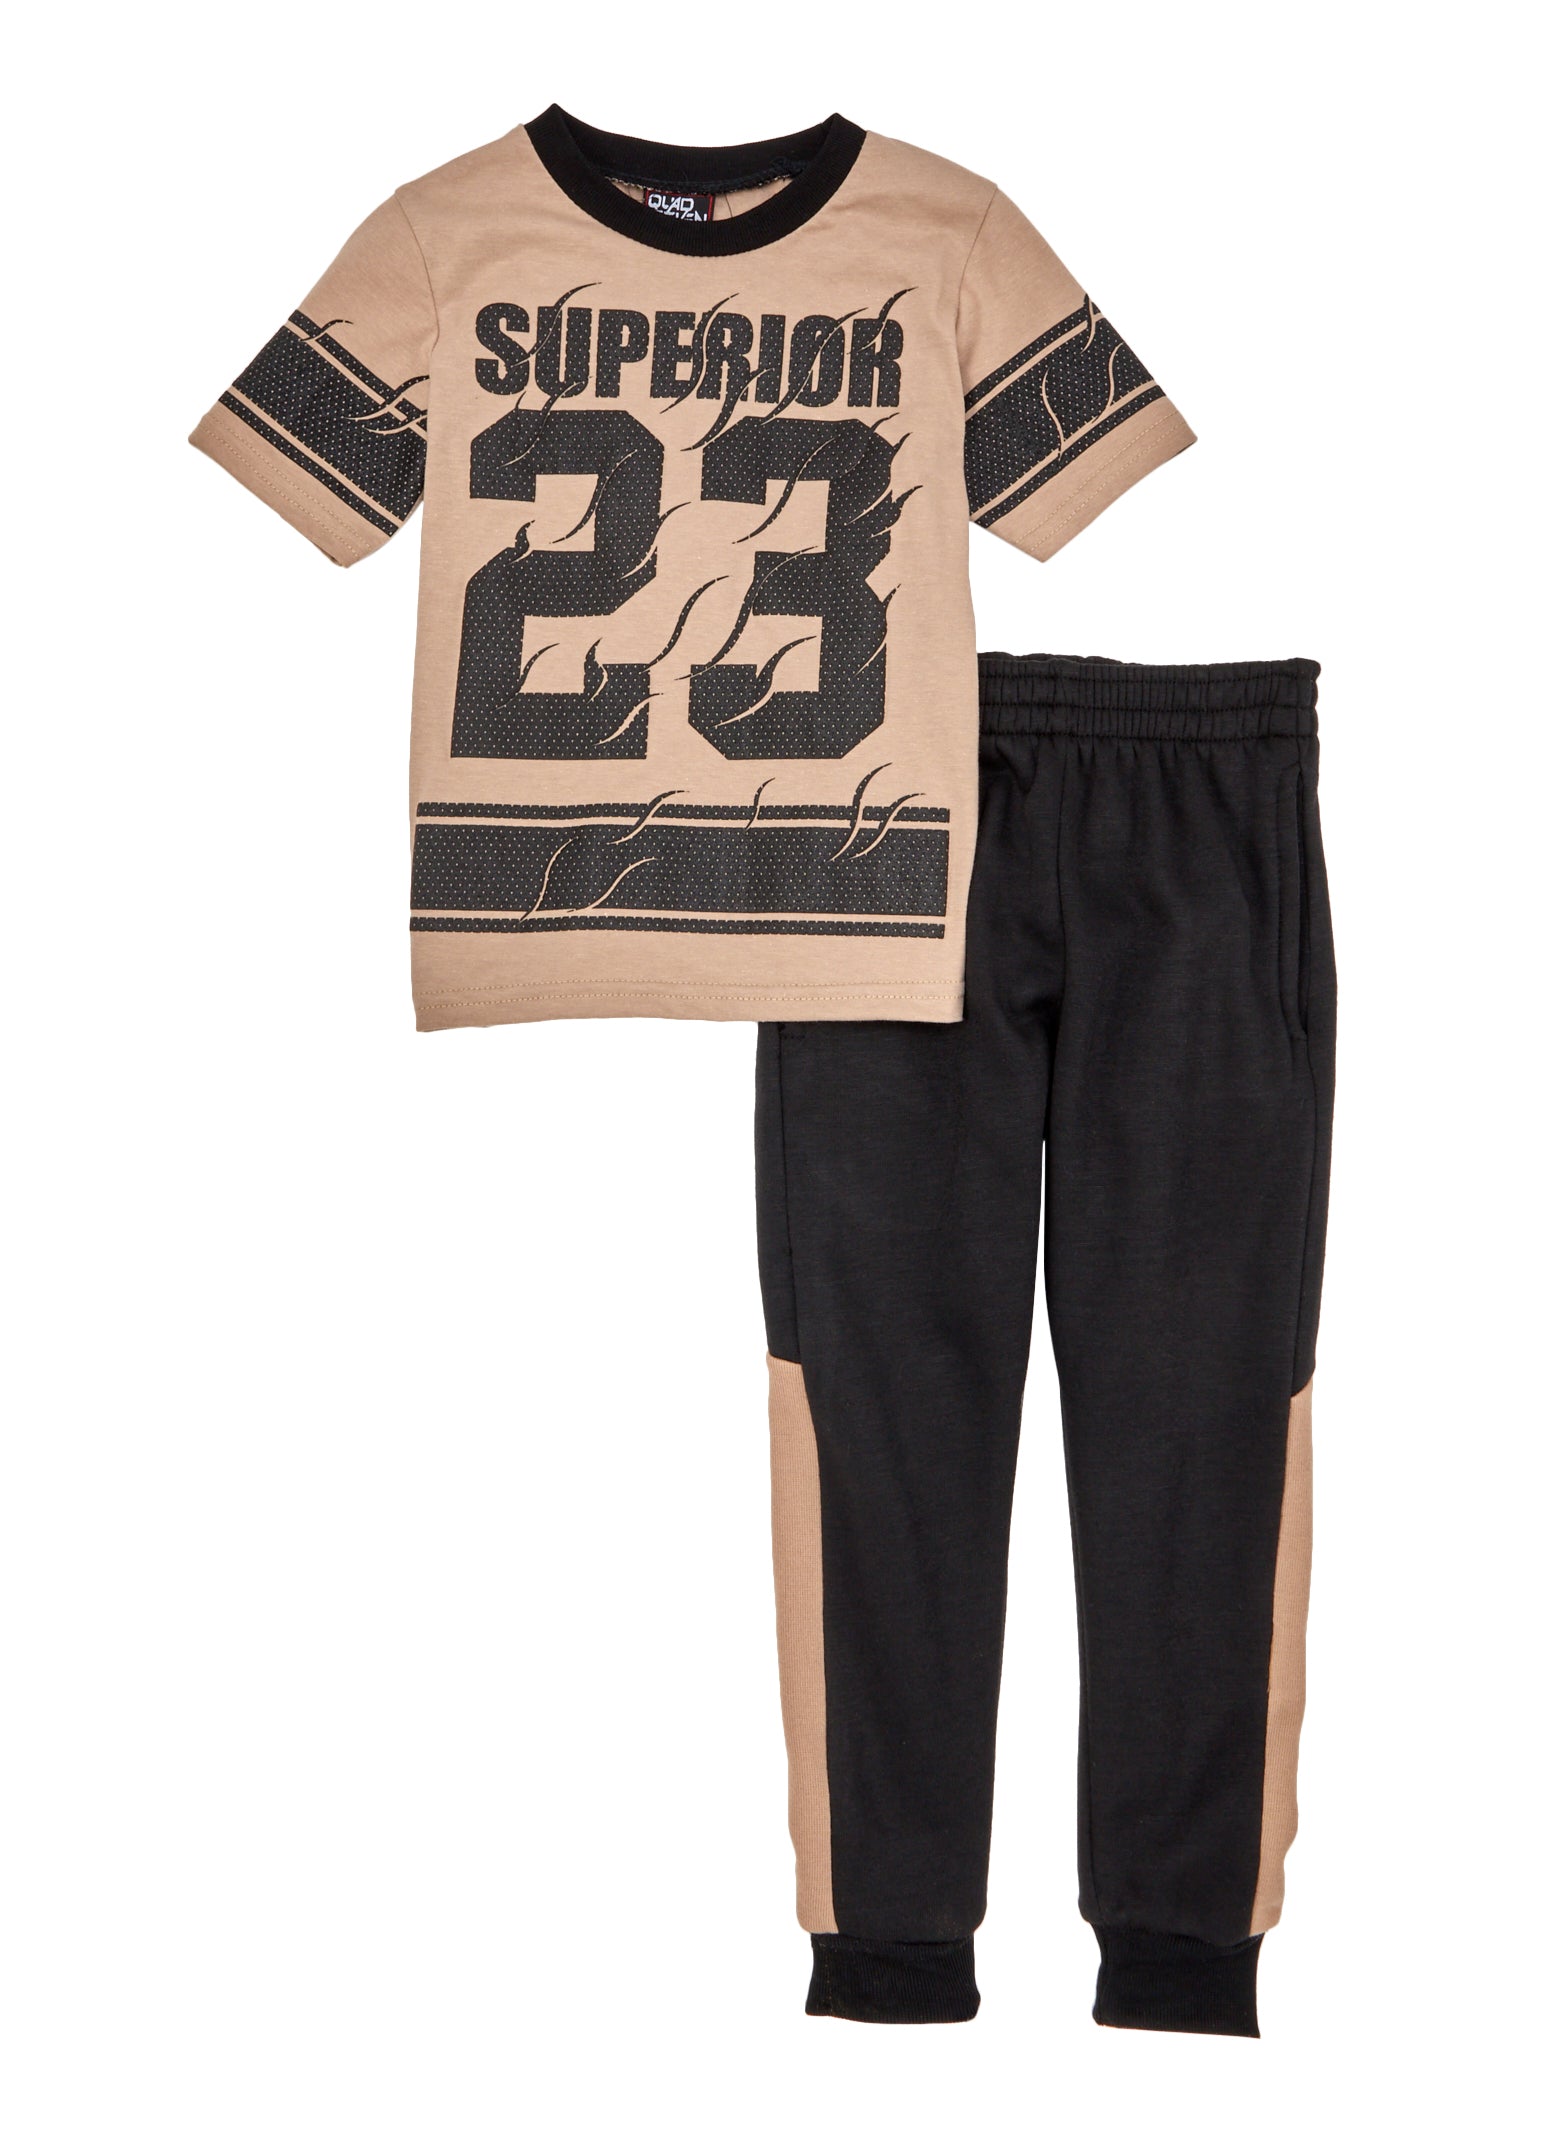 Little Boys Superior 23 Graphic Tee and Joggers, 4